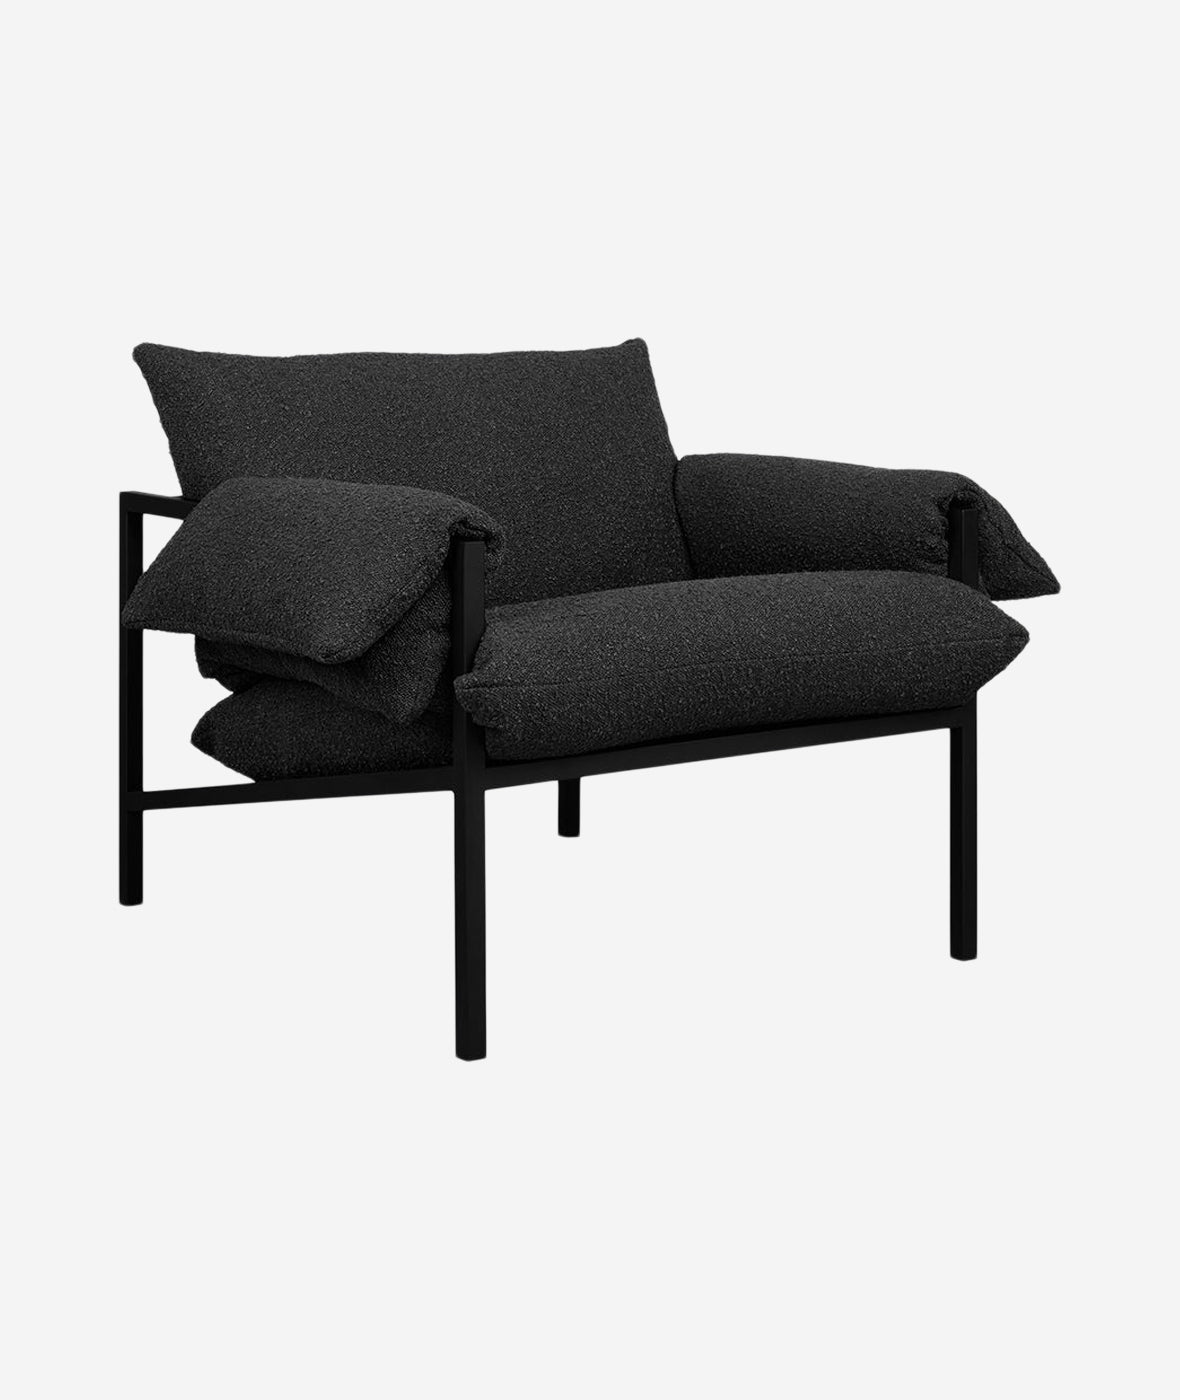 Fulton Lounge Chair - More Options